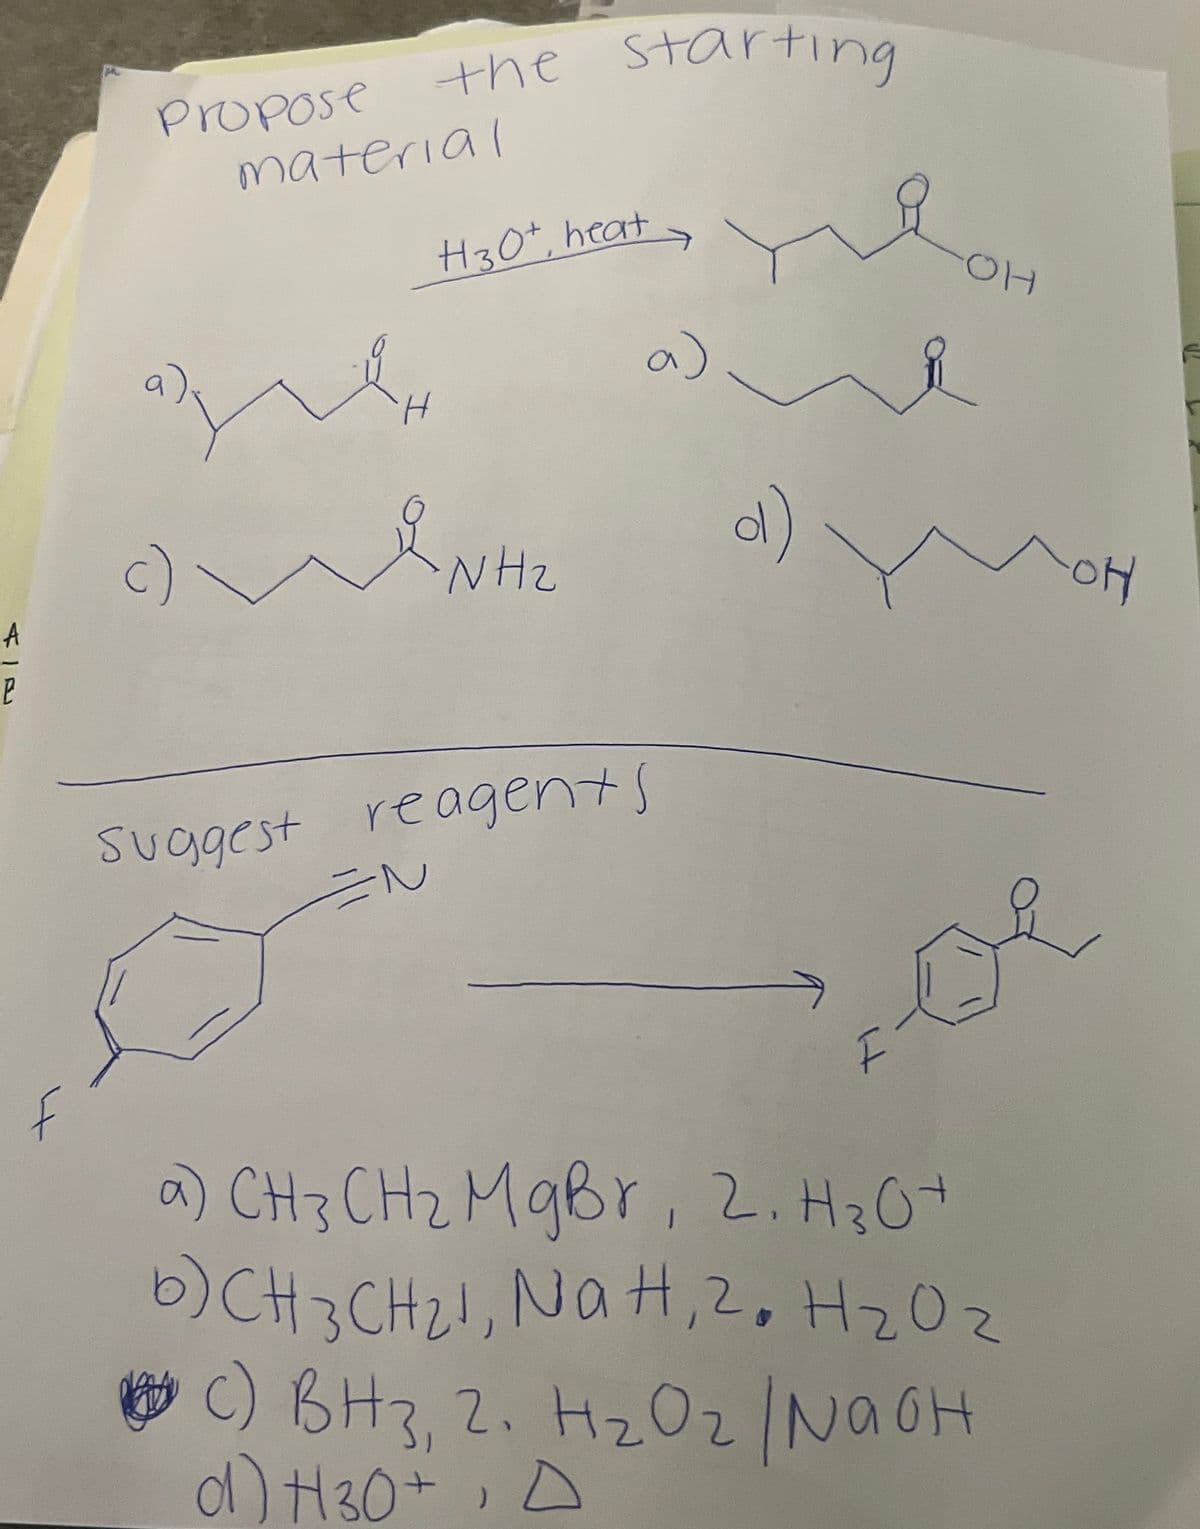 Propose
the starting
material
Wμ
H30+, heat
a)
d)
c)
NH₂
P
Suggest reagents
EN
якое
a) CH 3 CH ₂ MgBr, 2. H3O+
b)CH3CH2, NaH, 2. H₂Oz
C) BH3, 2. H₂O2 | NaOH
α) H30+, D
HO